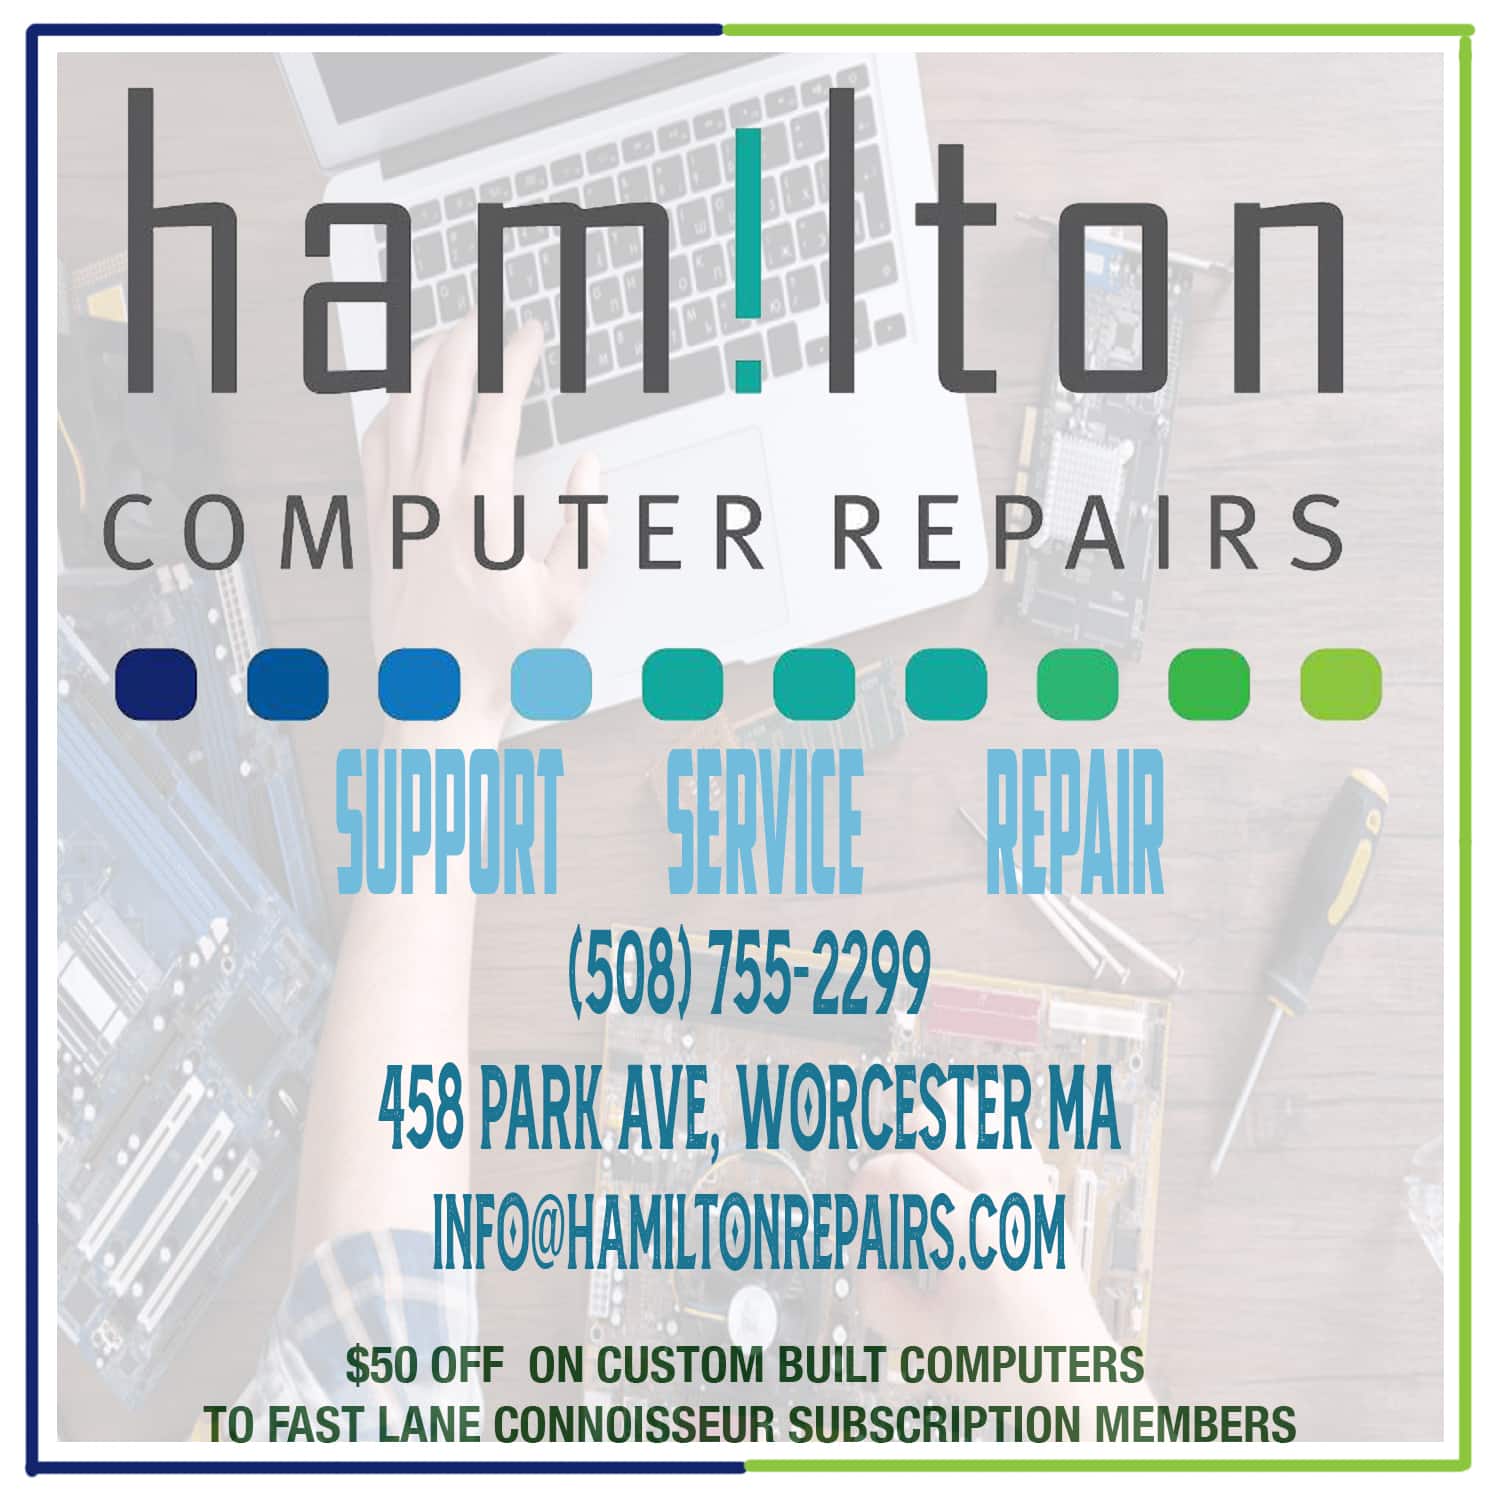 Delivered cannabis home delivery subscription program x Hamilton Computer Repairs